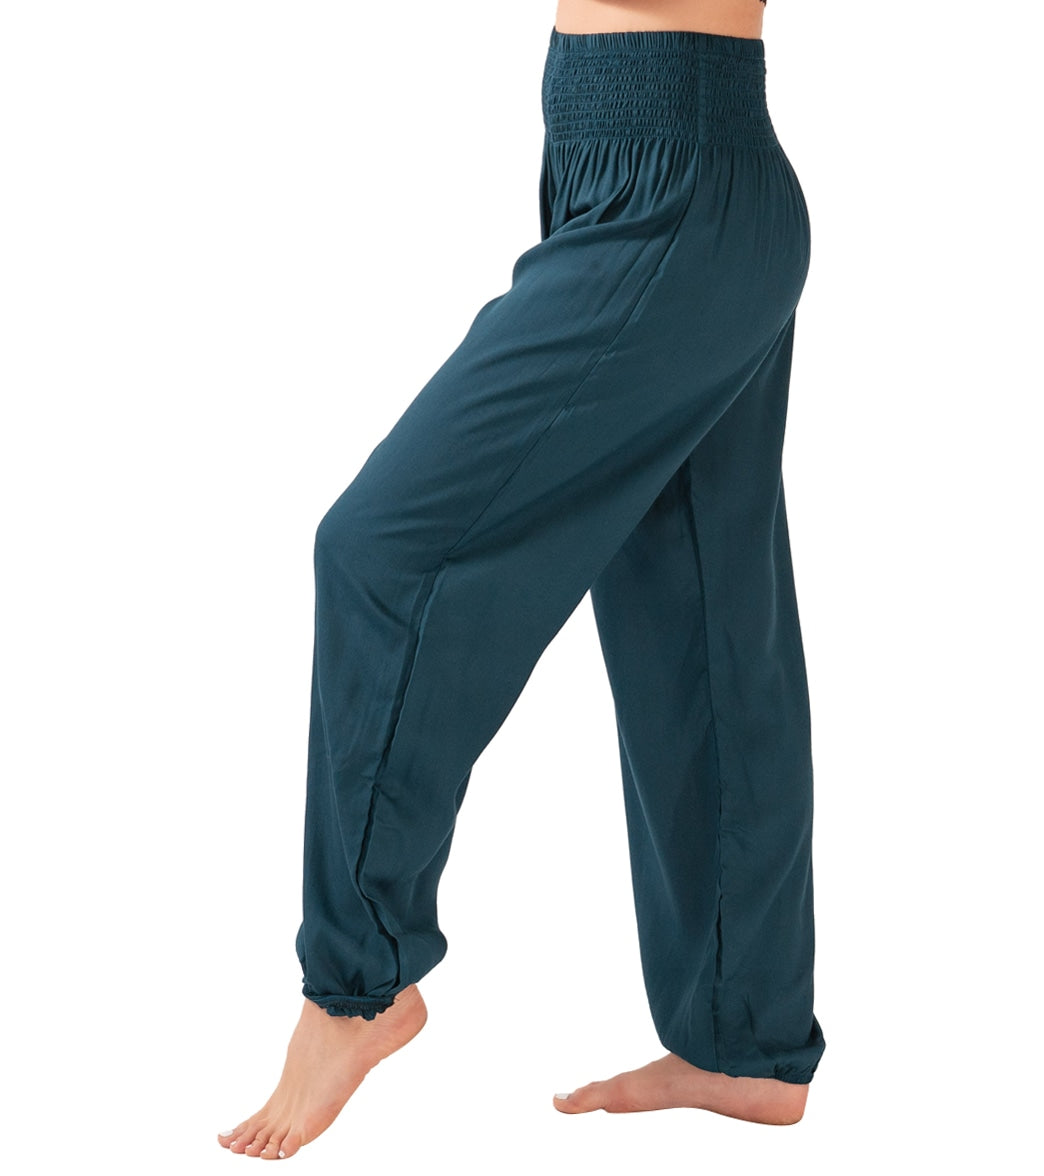 Wide Leg Yoga and Harem Pants for Women in Cotton Jersey 